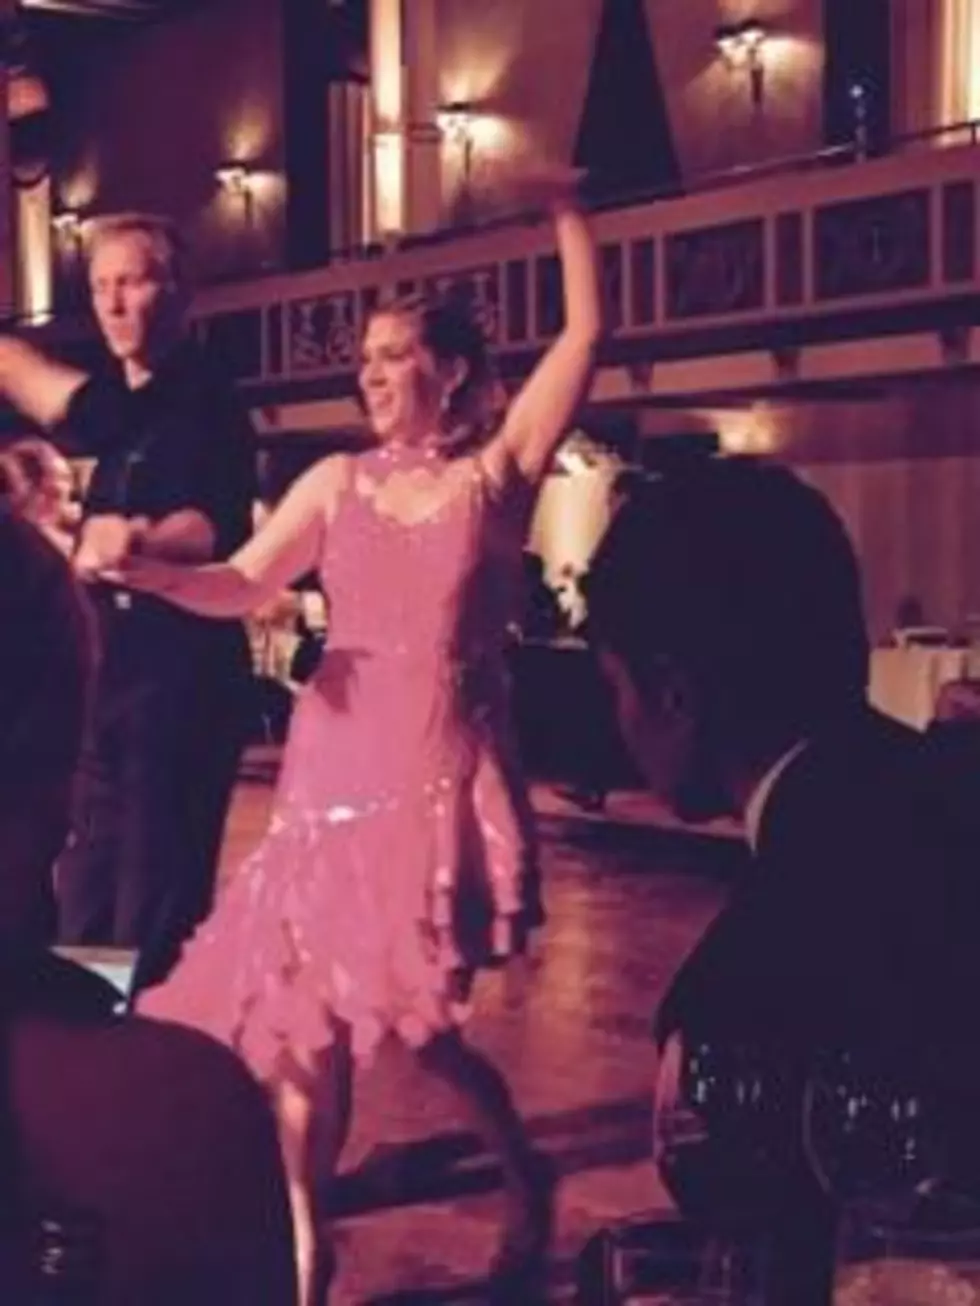 See Laura's Dance! [VIDEO]